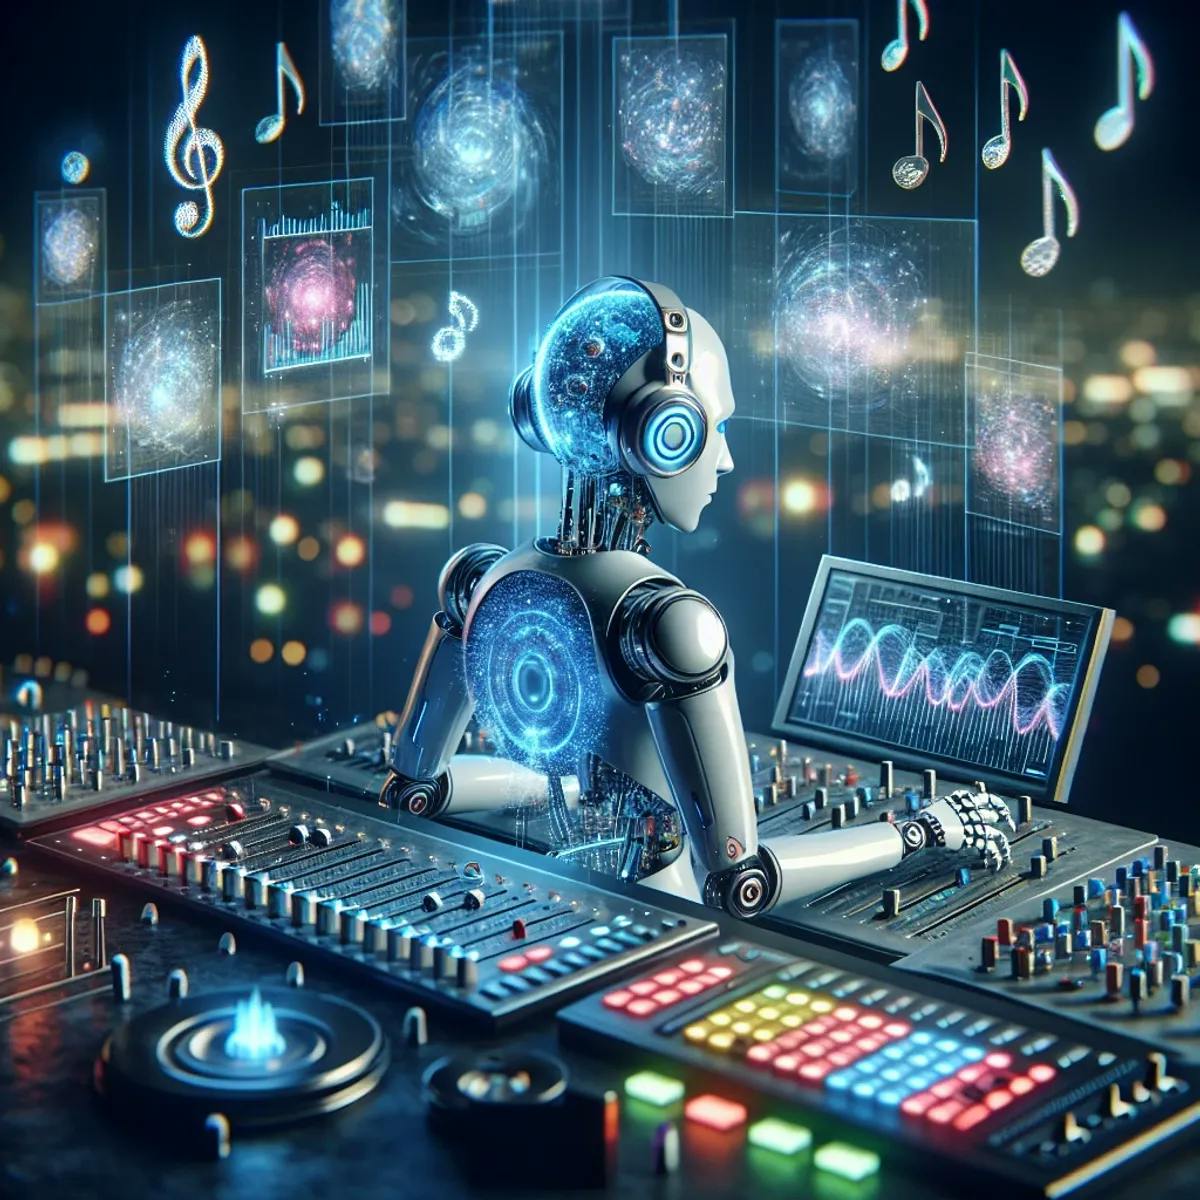 A silver humanoid robot with glowing blue eyes sits at a modern electronic music mixer surrounded by floating holographic screens displaying abstract waveforms and notes, while transparent musical notes drift upwards on both sides. In the background, a futuristic cityscape twinkles.